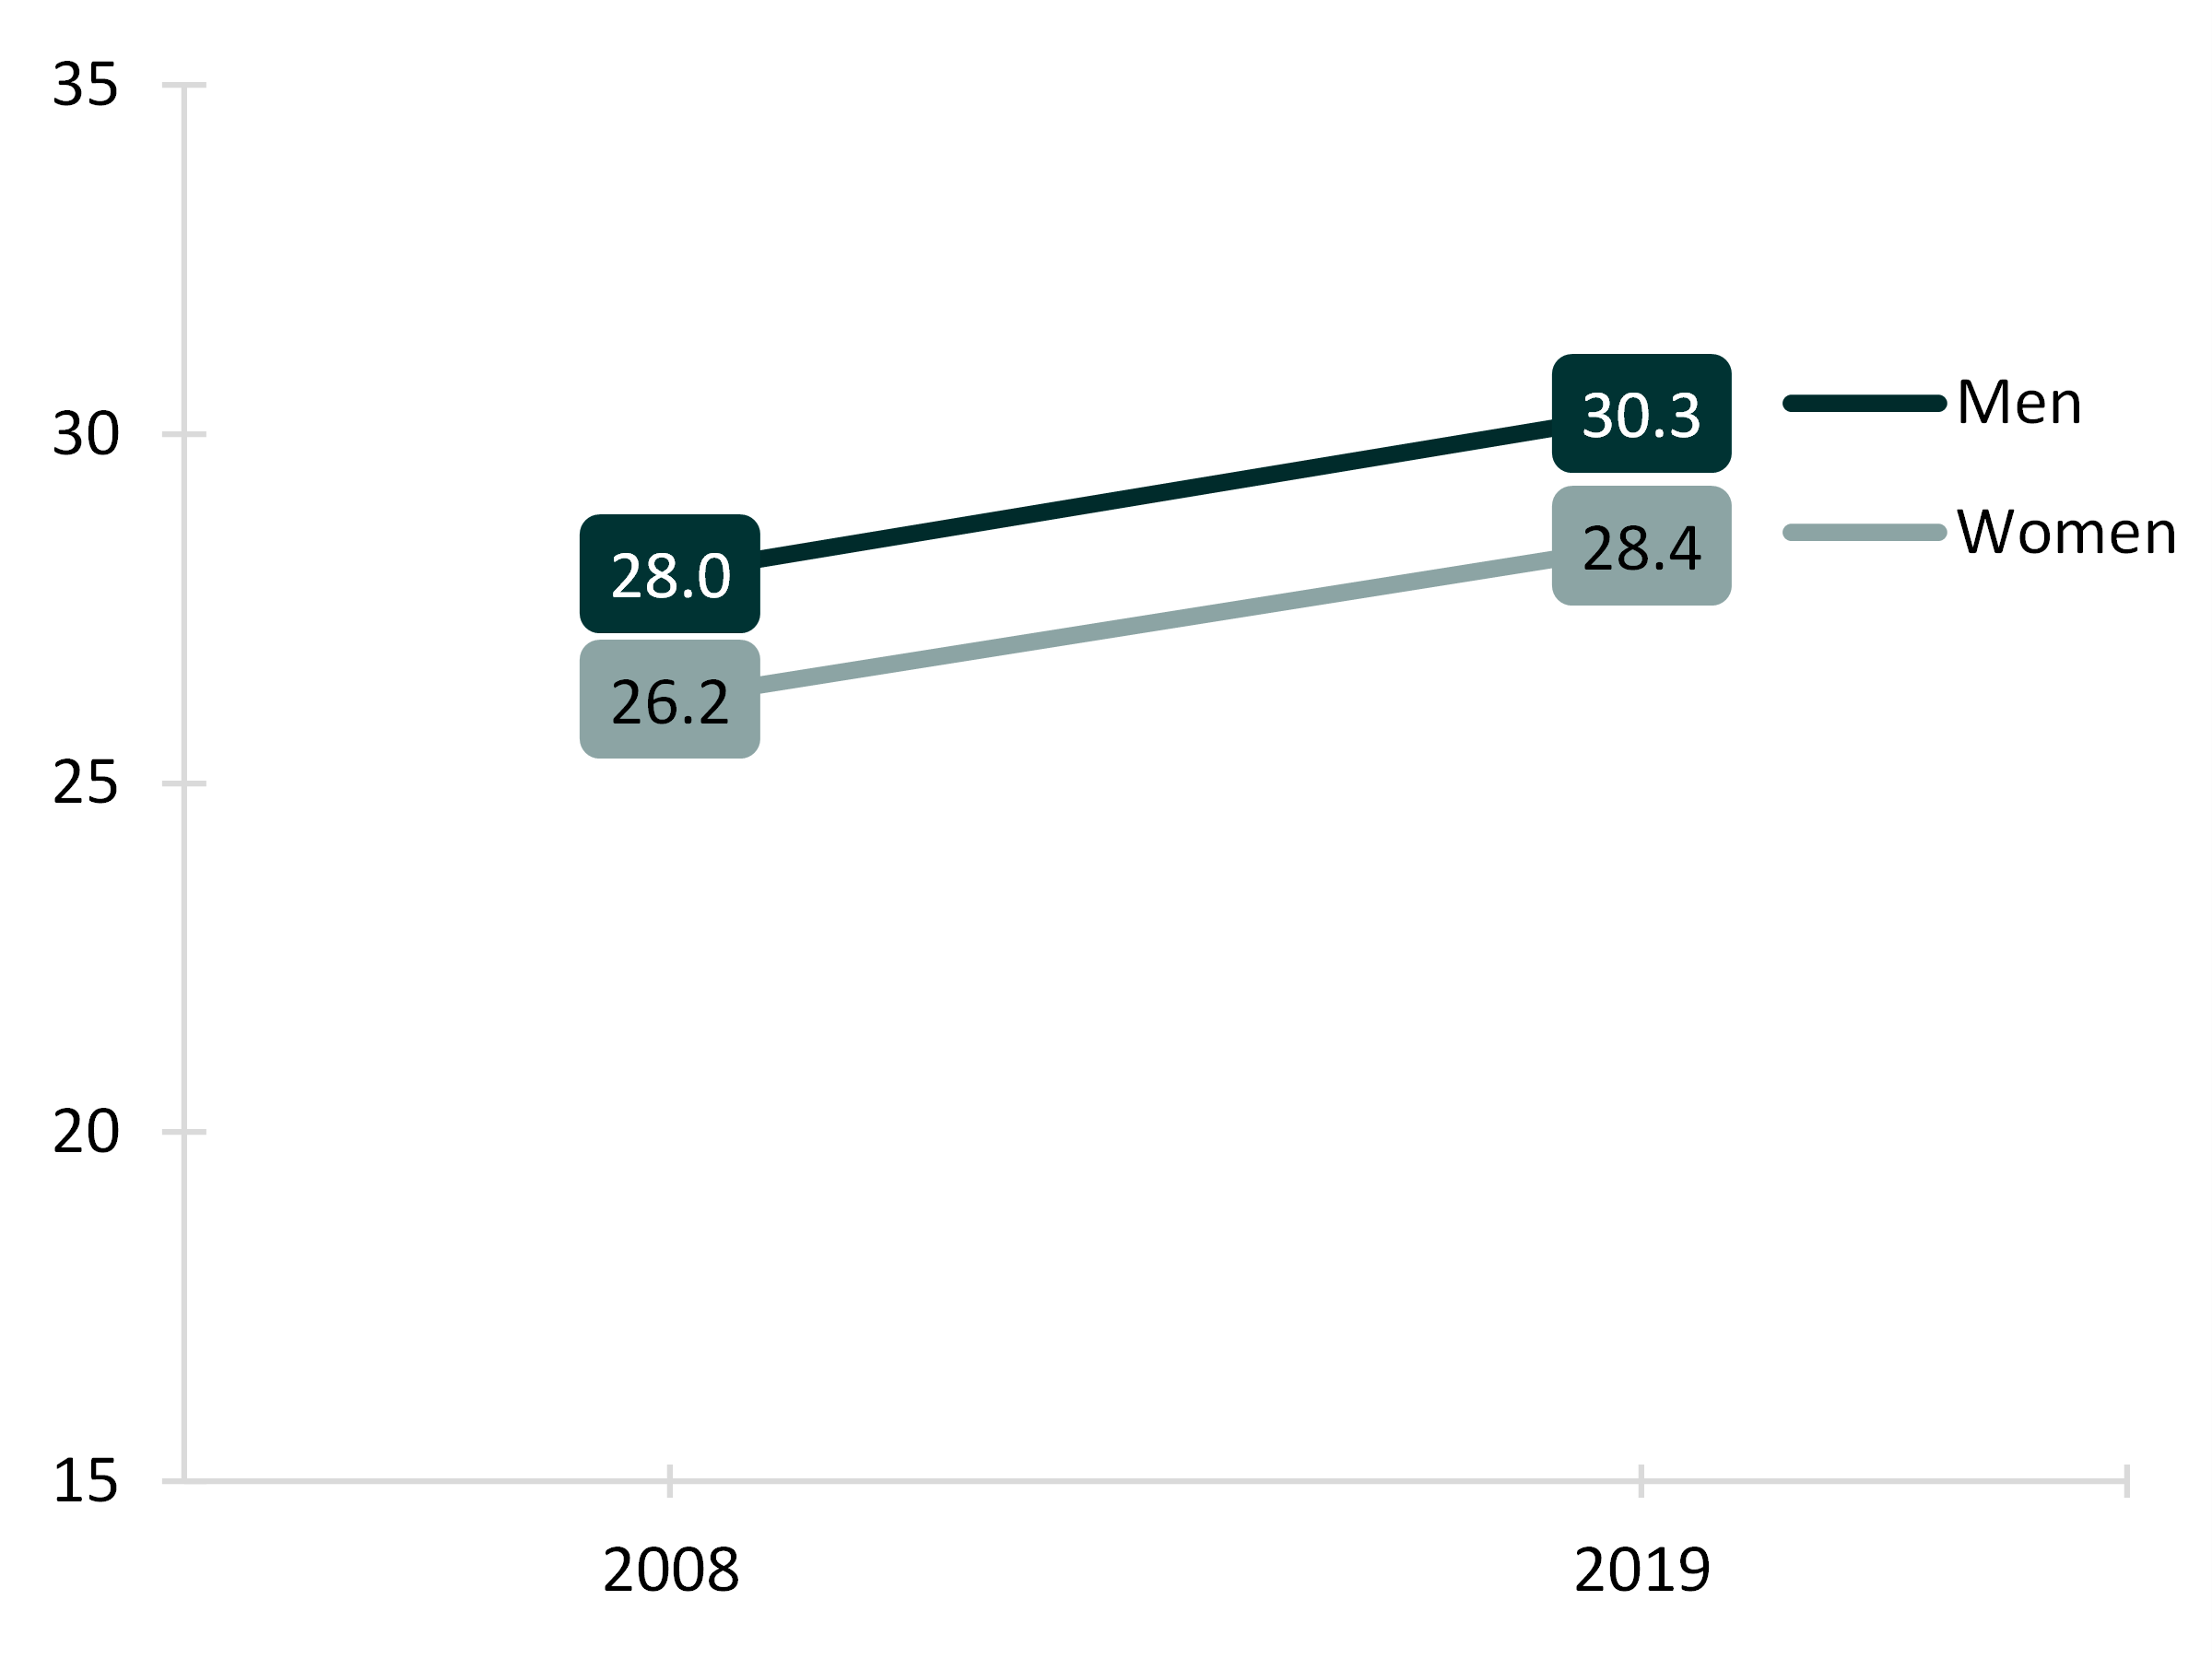 teal line chart showing Figure 1. Men and Women's Median Age at First Marriage, 2008 & 2019